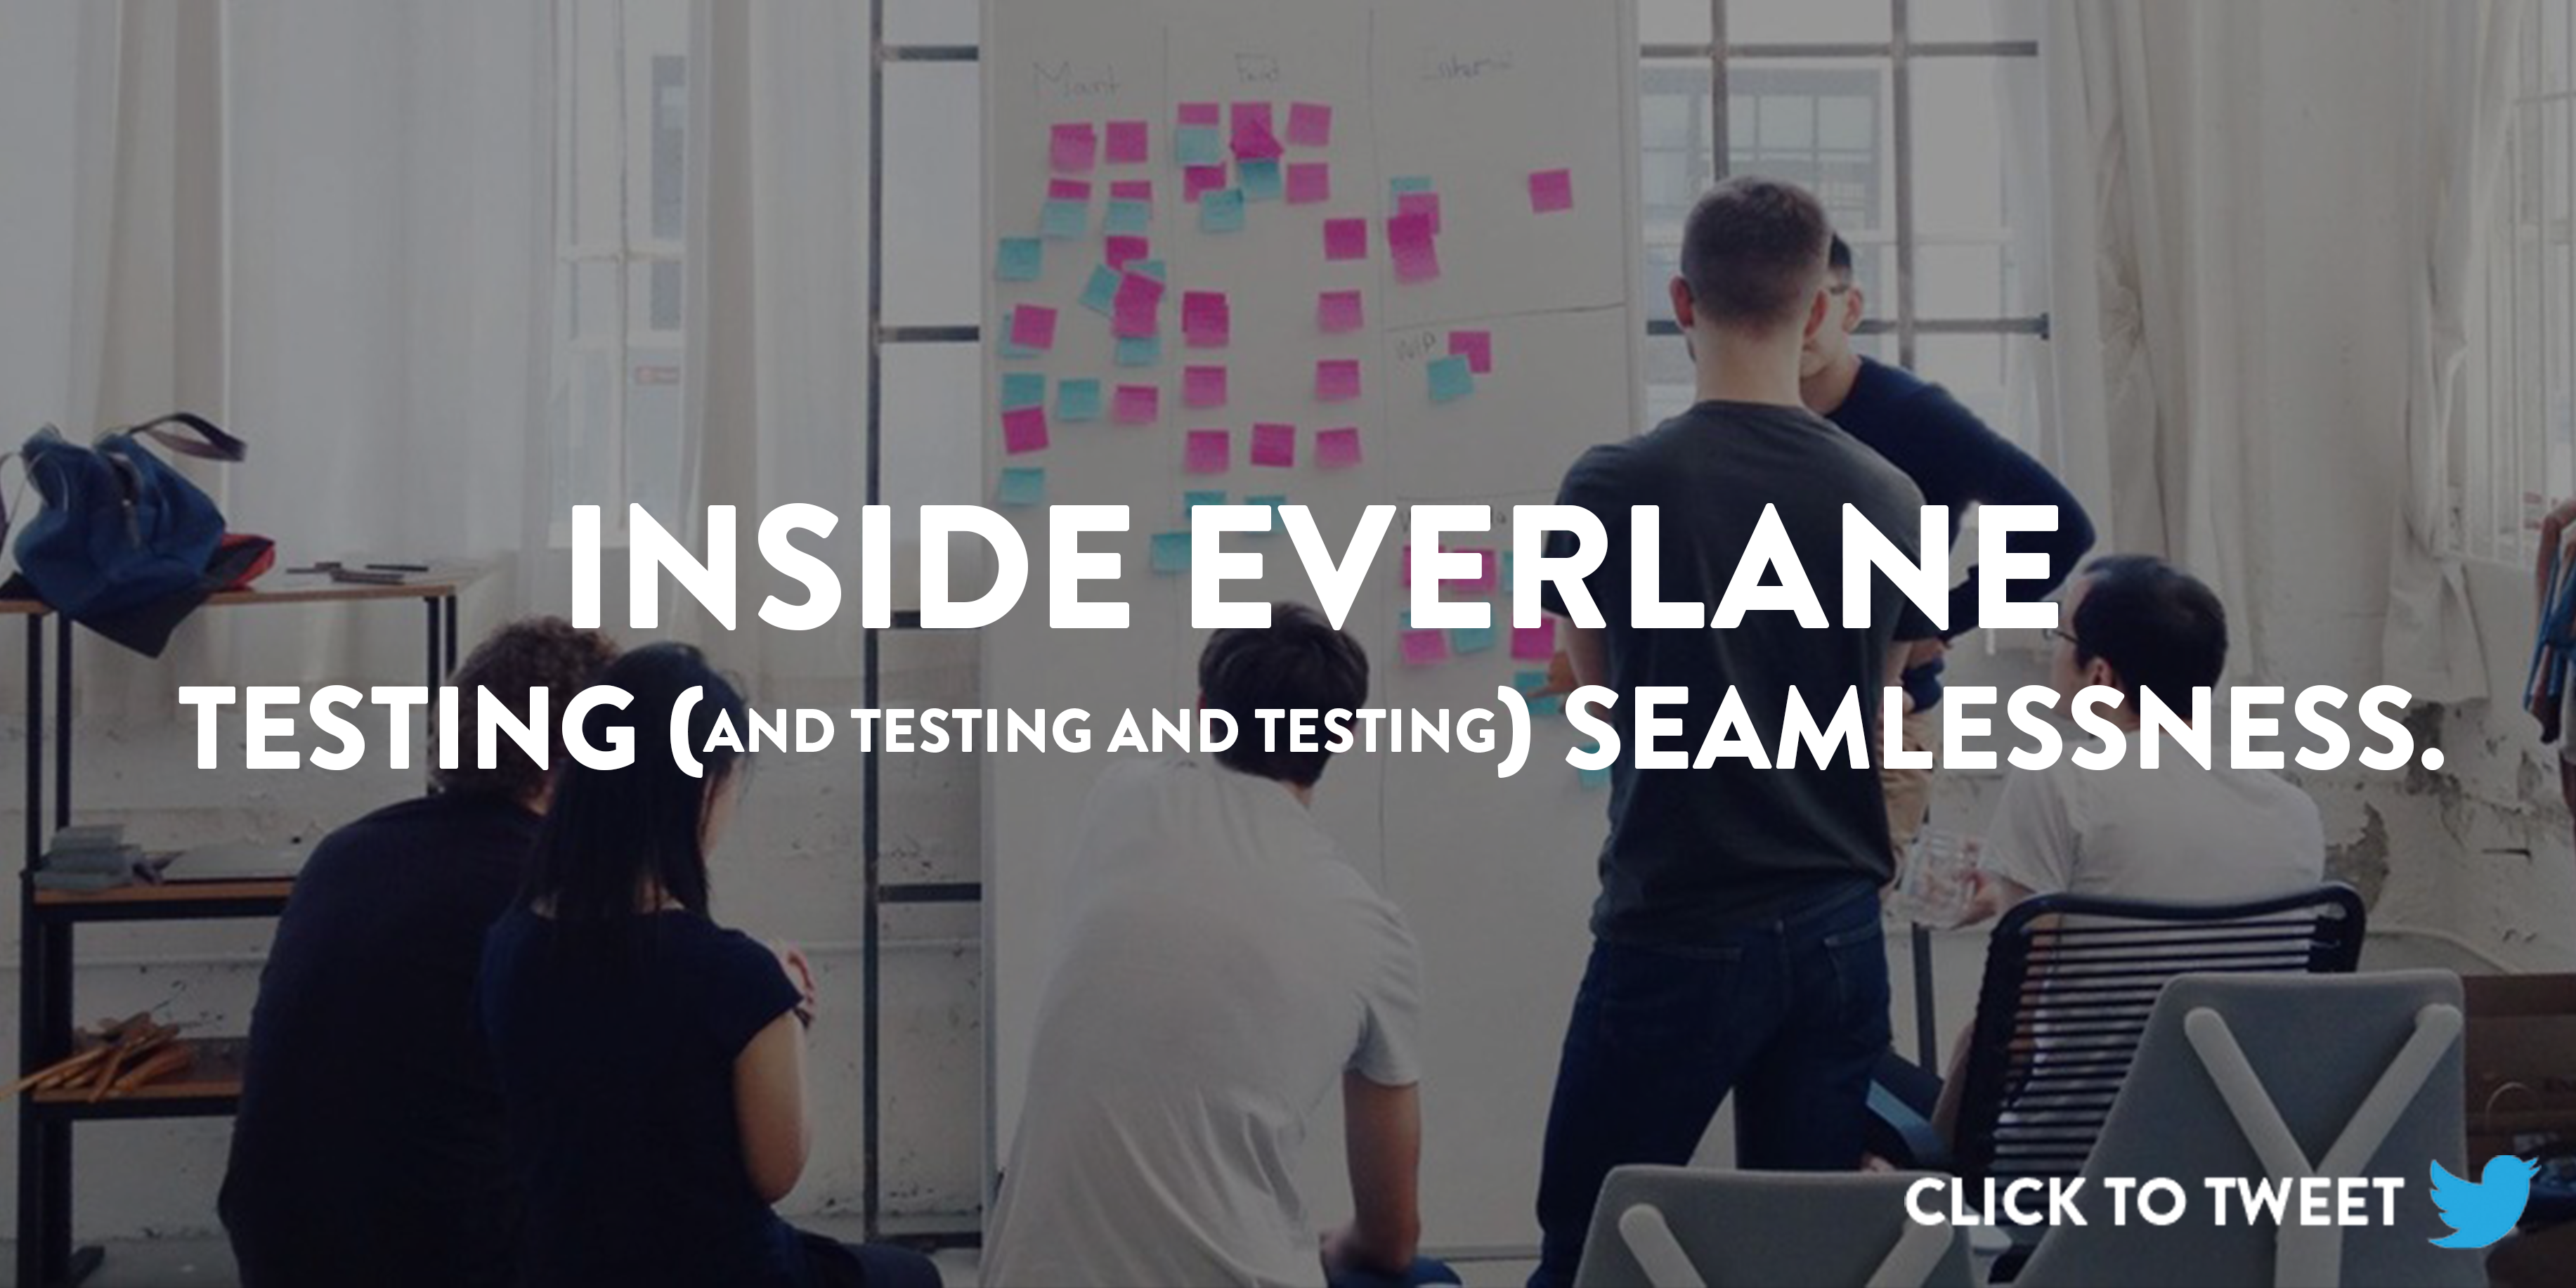 Click to Tweet: "Inside Everlane - Testing and Testing and Testing Seamlessness." 